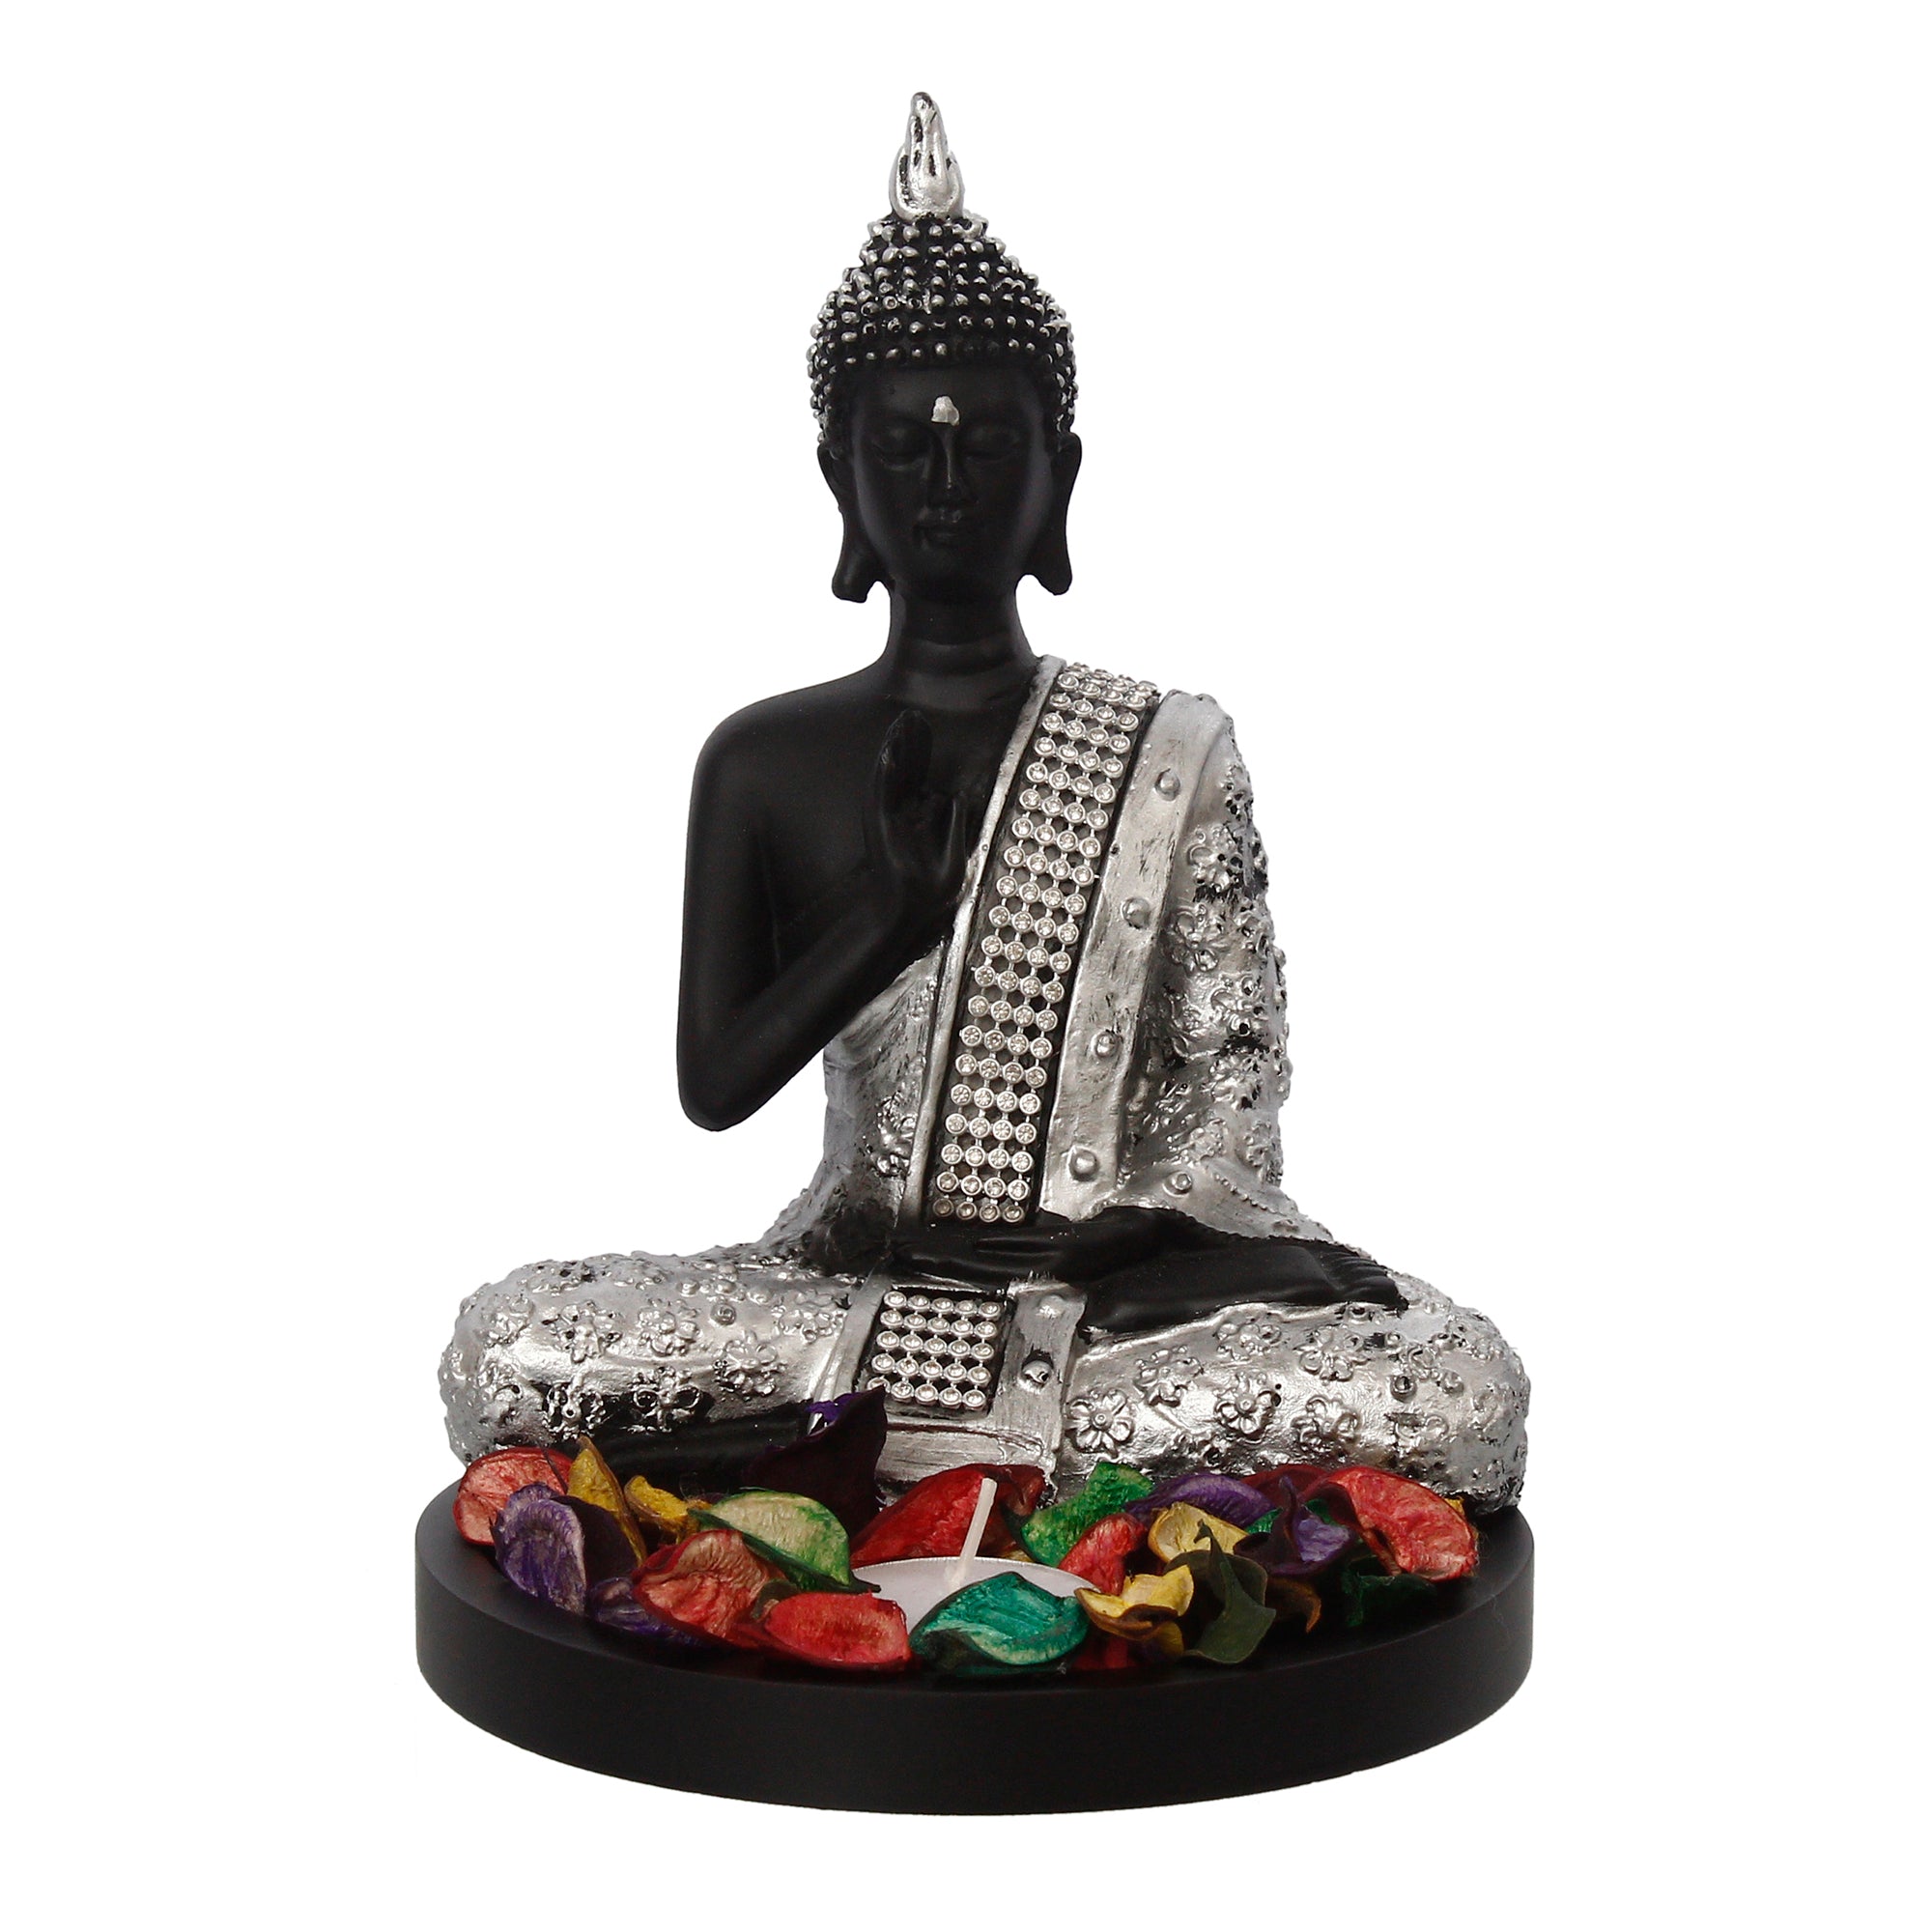 Polyresin Black and Silver Handcrafted Meditating Blessing Buddha Statue with Wooden Base, Fragranced Petals and Tealight 2